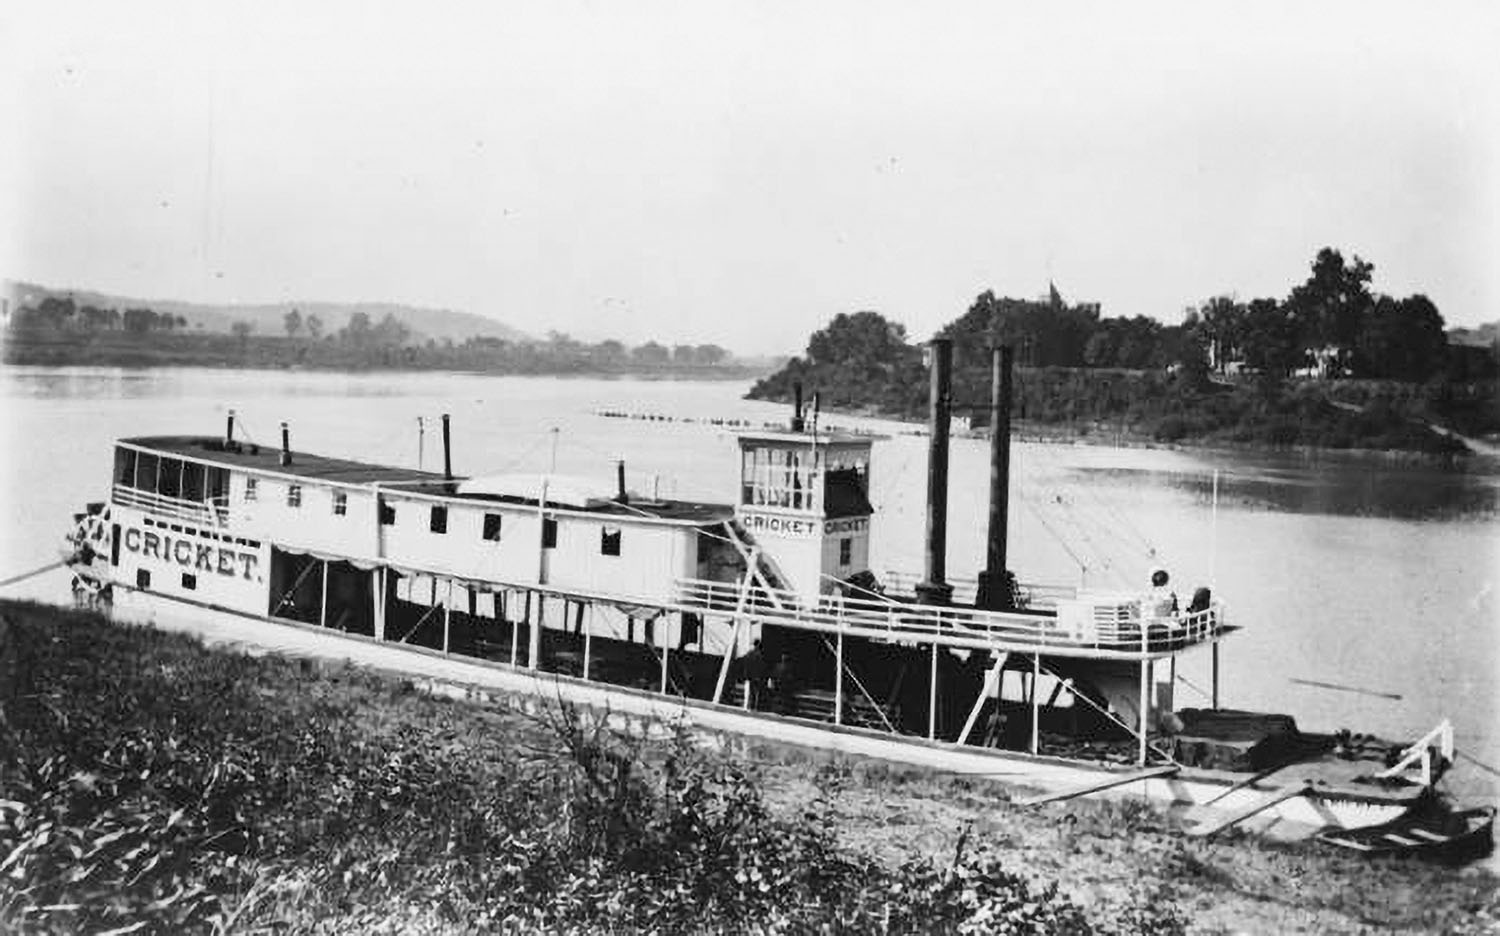 The Cricket, new at Cloverport, Ky., in 1900. (Capt. Jesse Hughes photo, Capt. David Smith collection)